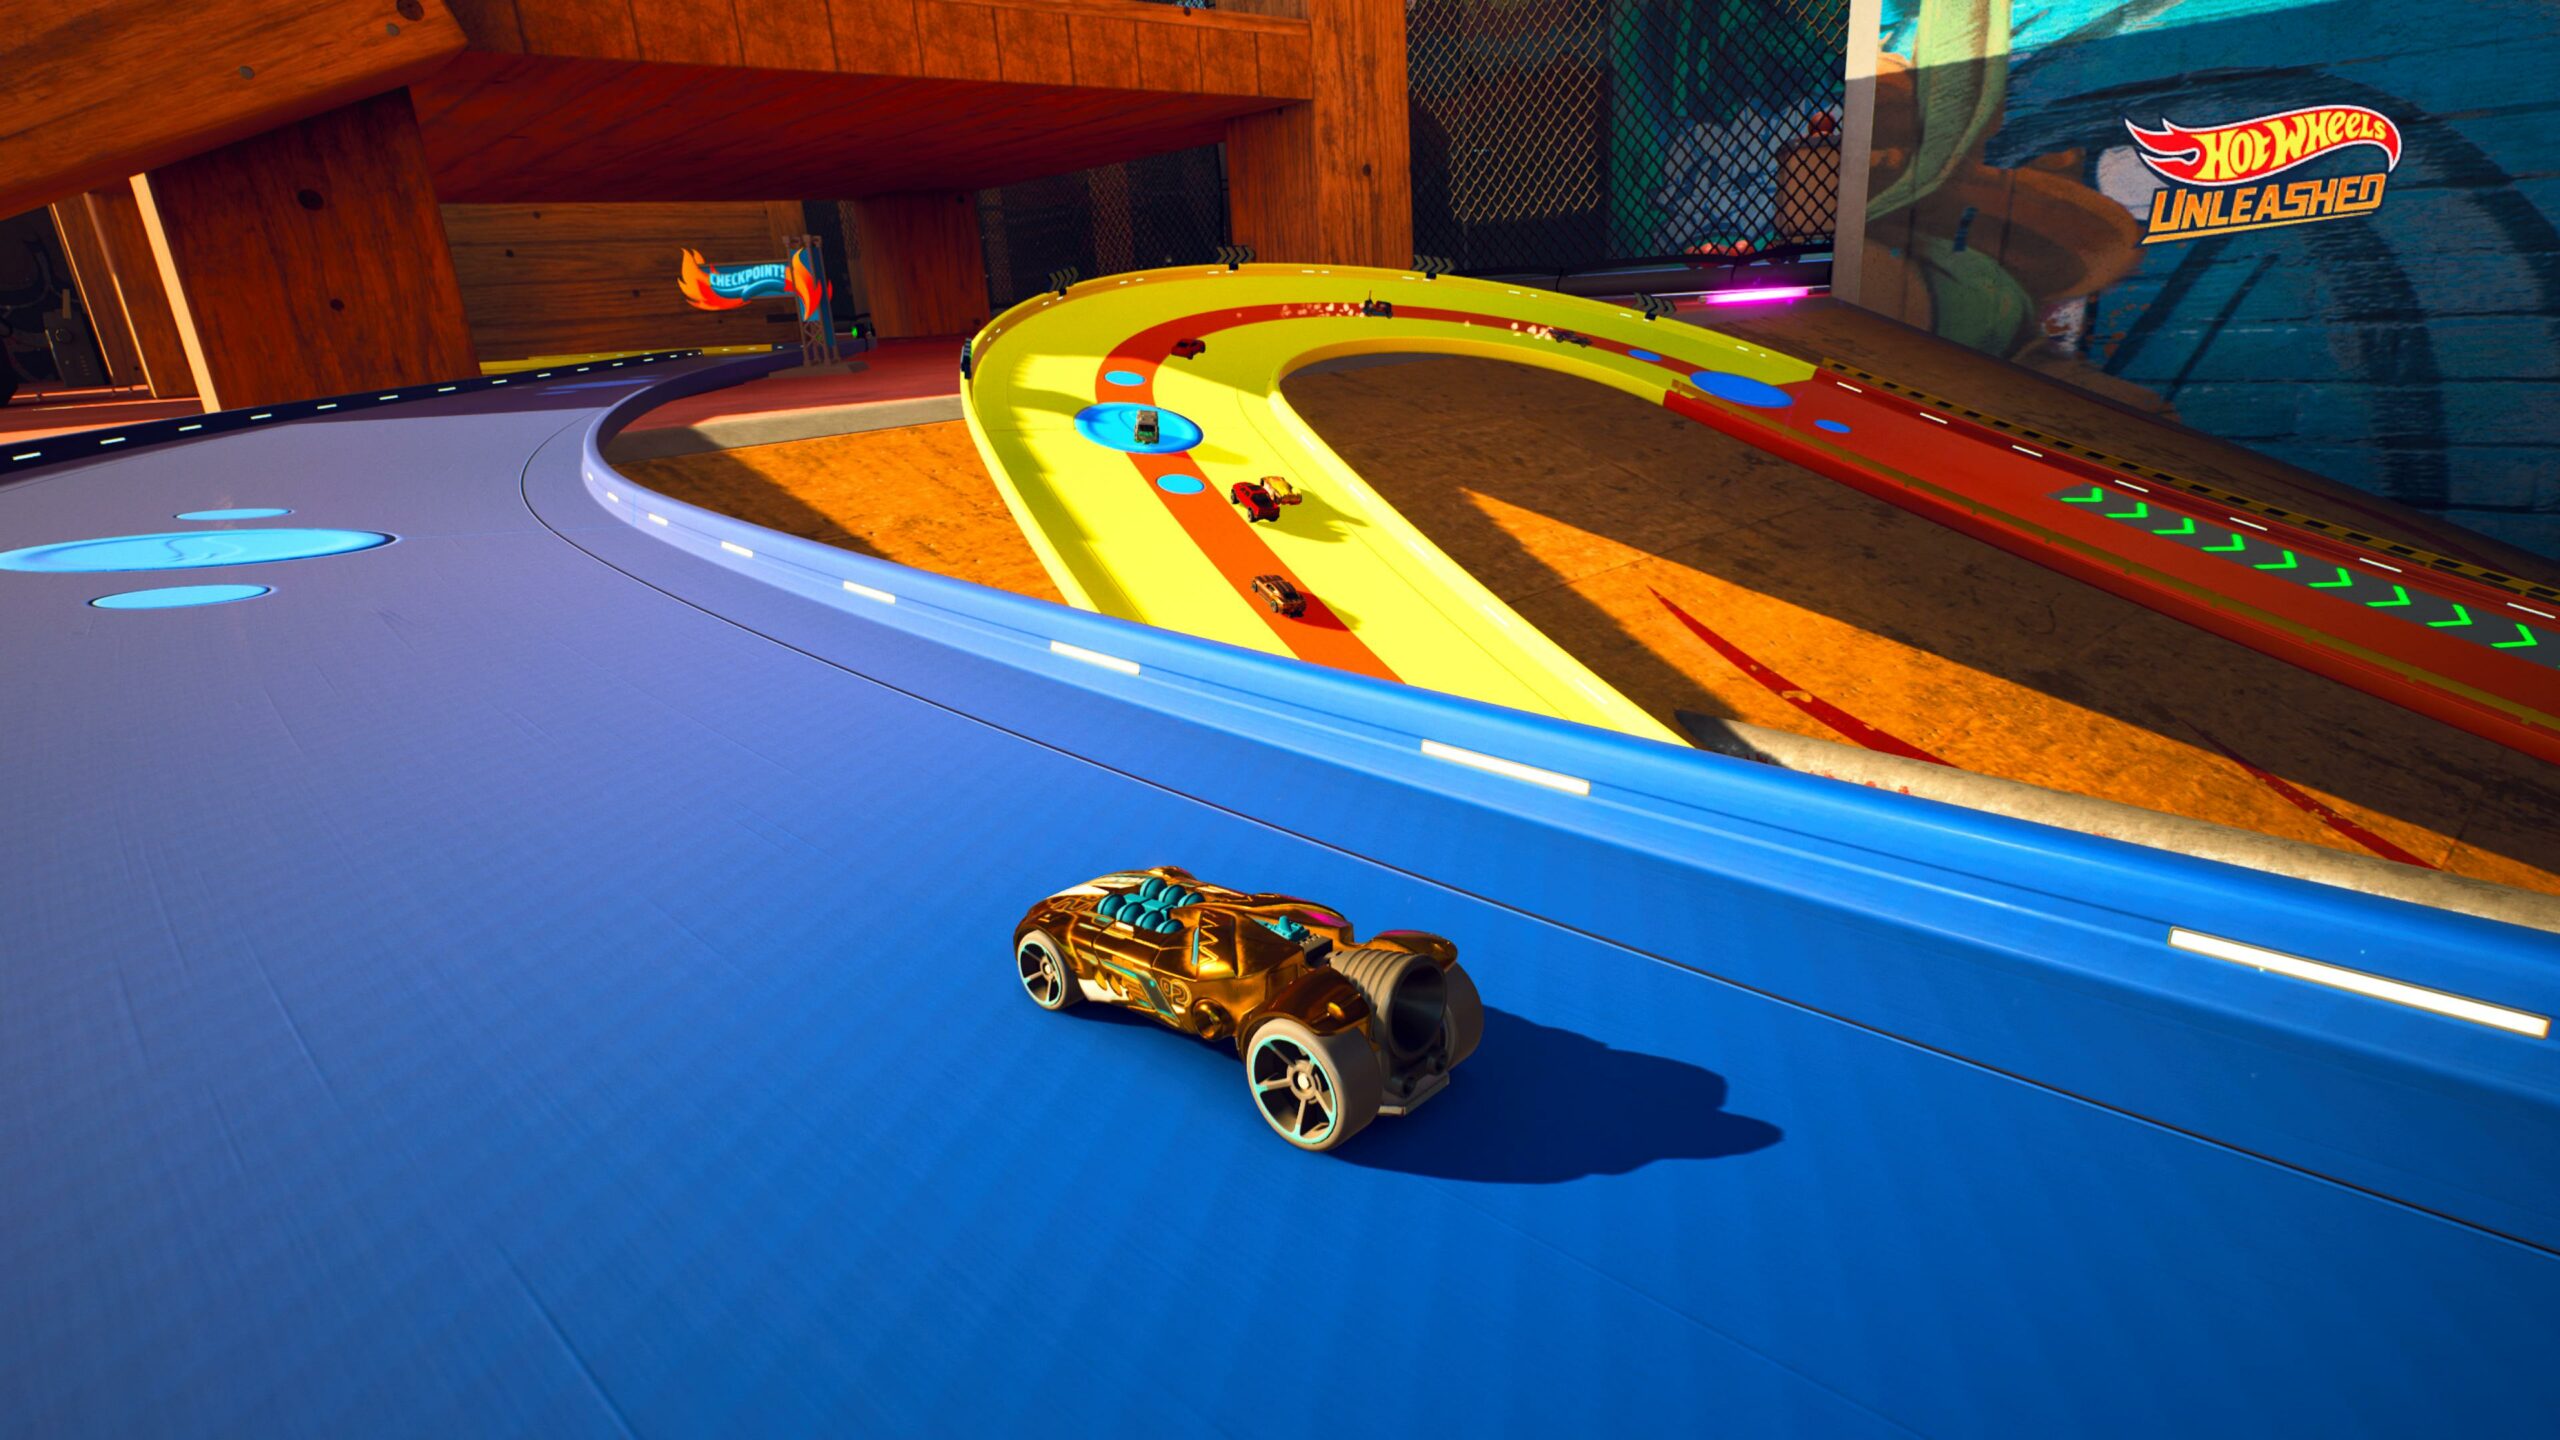 Hot Wheels Unleashed review